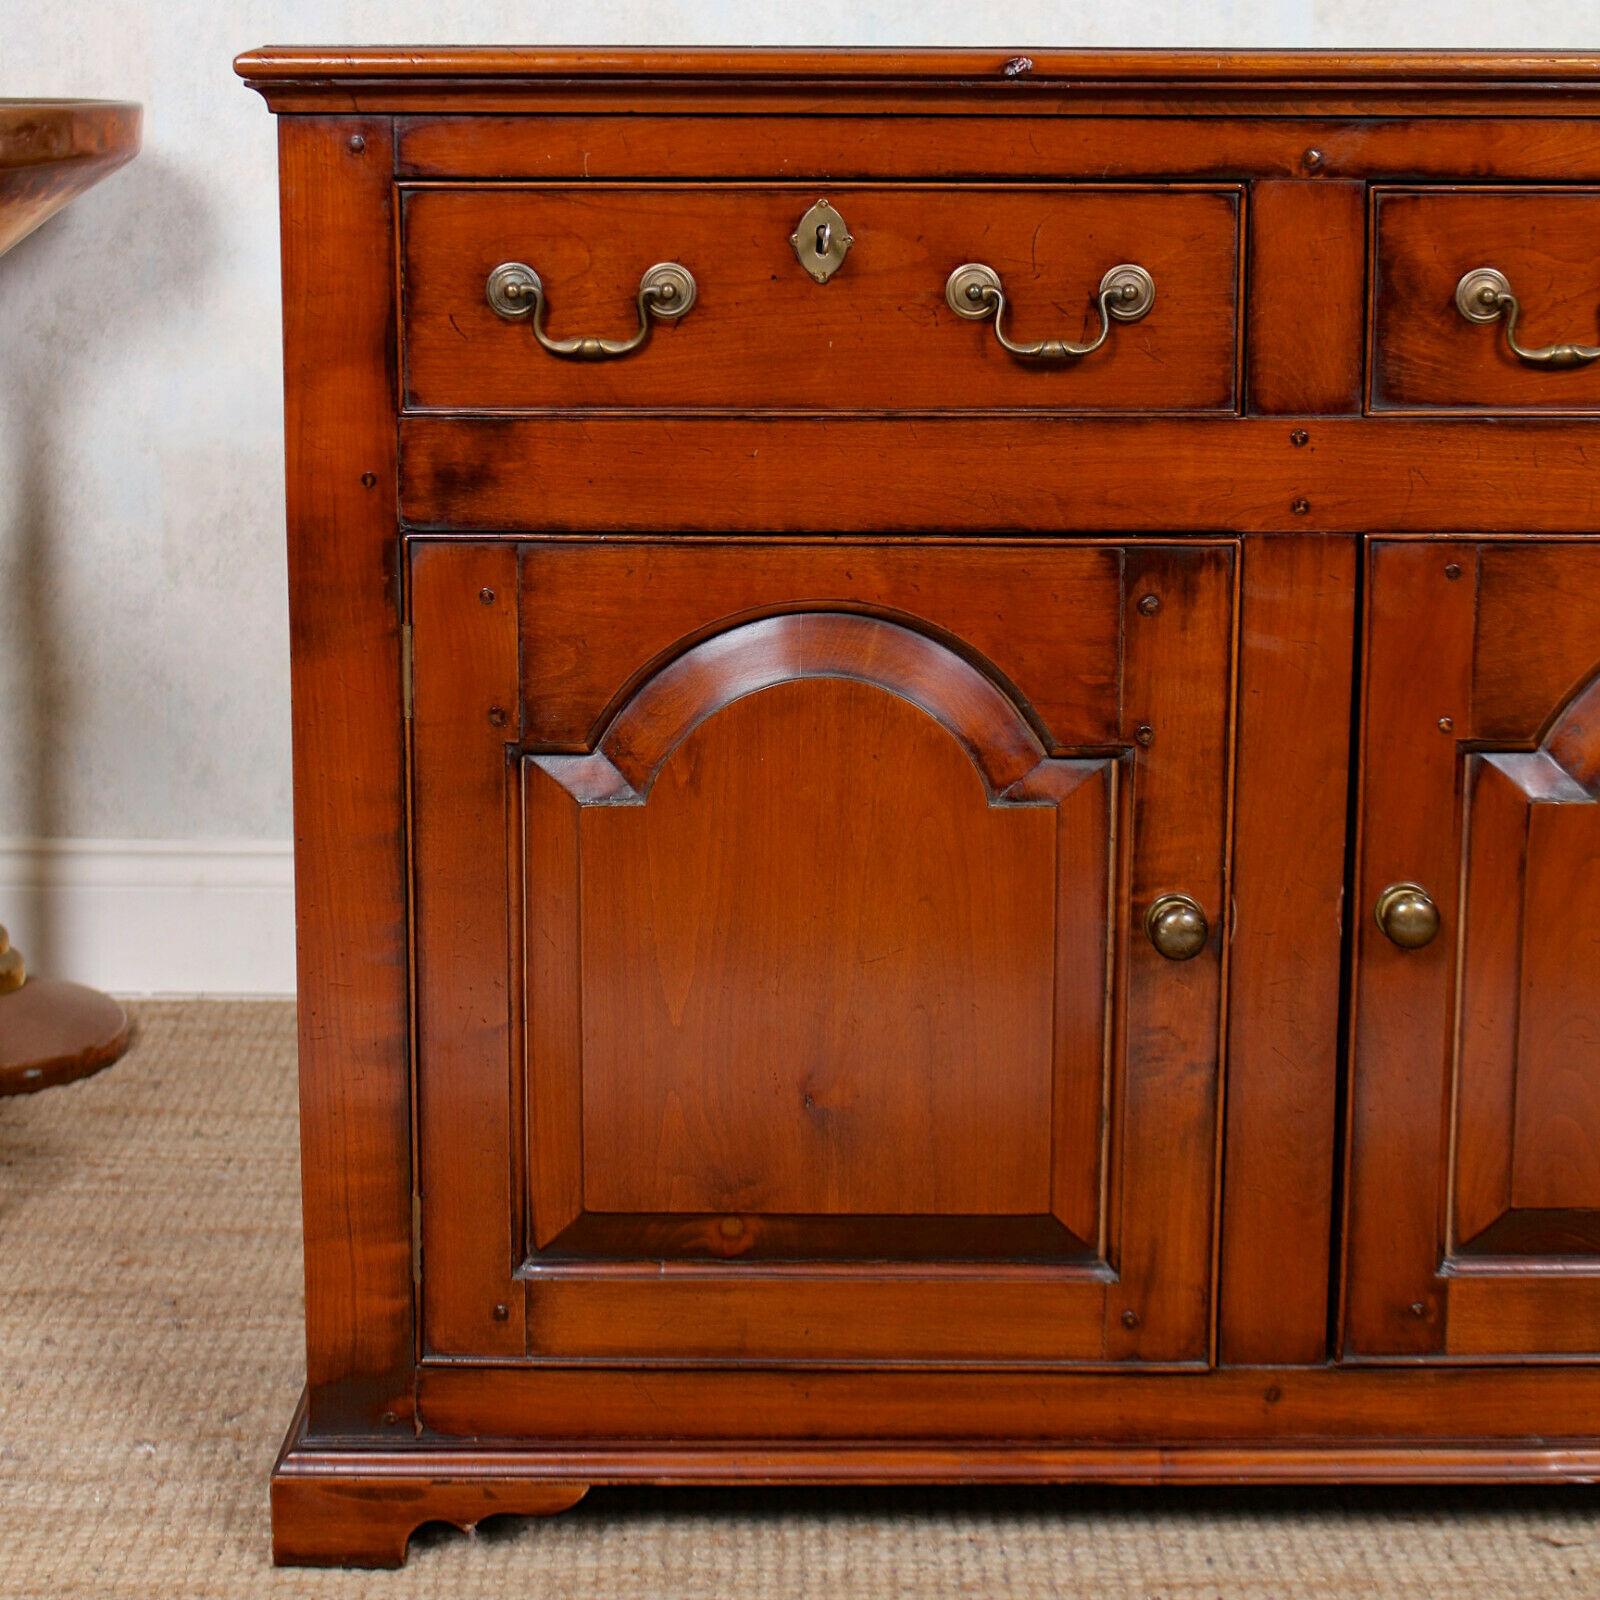 A fine quality early 20th century Arts & Crafts dresser base.
Of peg and tenon construction, the rectangular top with moulded edges above frieze drawers mounted with good handles and escutcheons, dovetailed jointing and clean interiors. A pair of